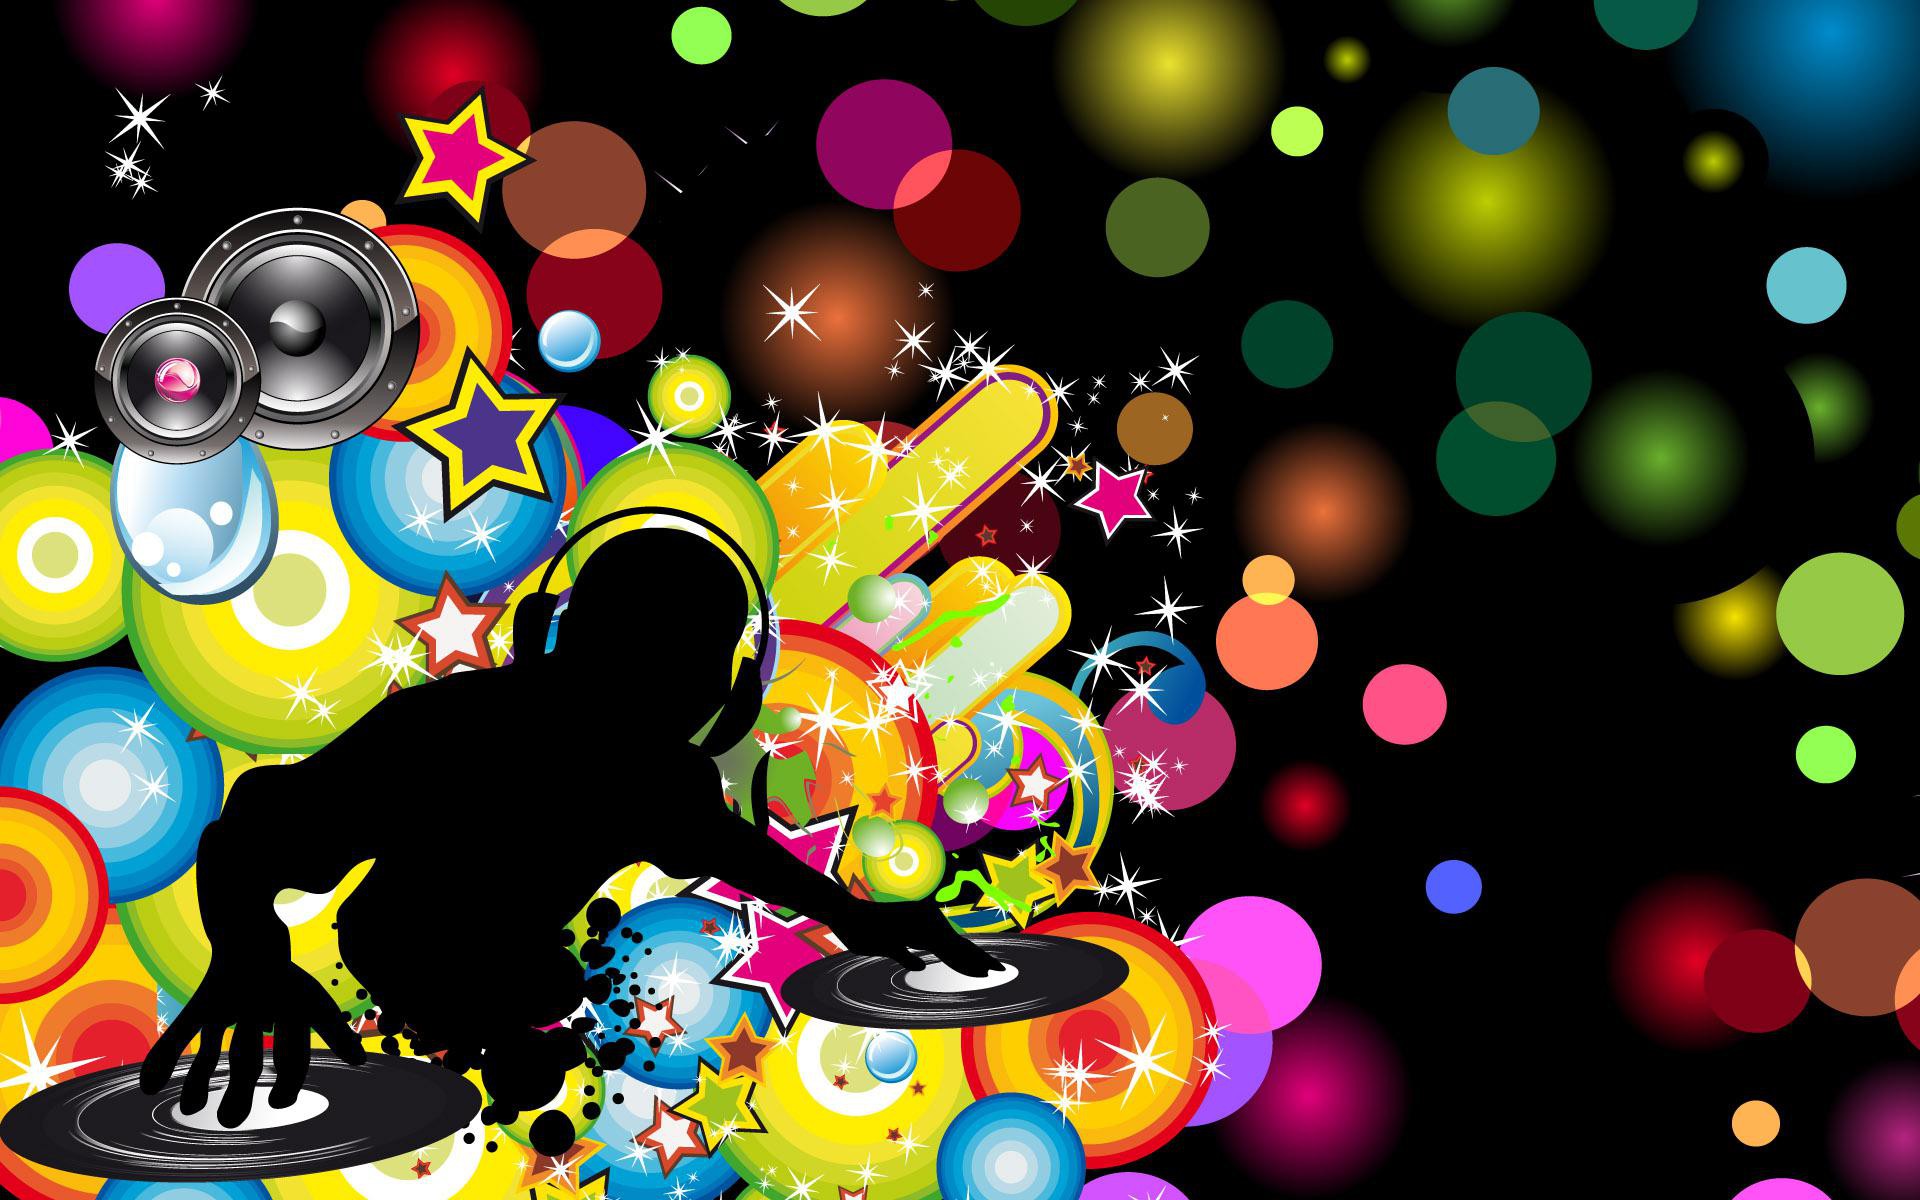 Wallpapers Music Other Colorful Dubstep 1920x1200 #music